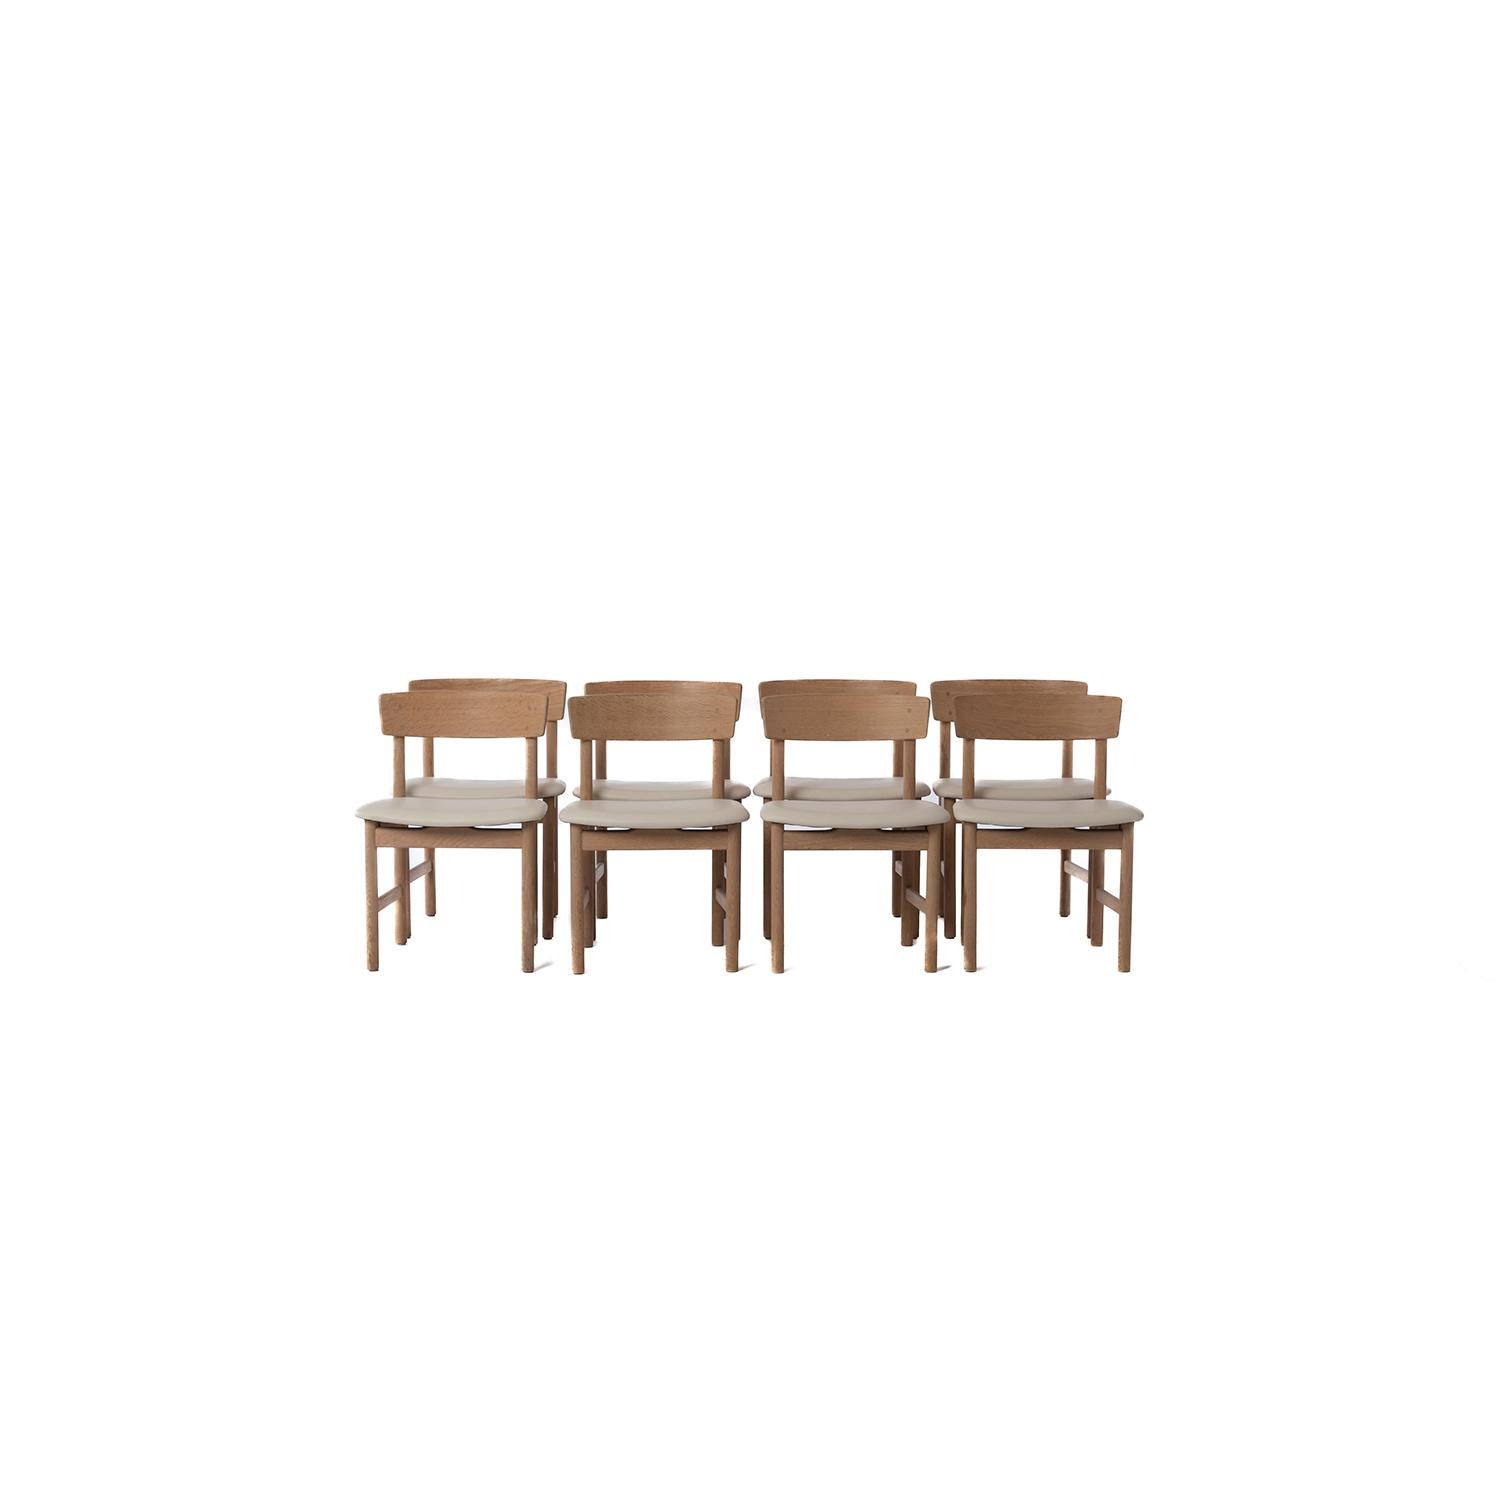 Danish modern soaped oak dining chairs designed by Borge Mogensen for Fredericia Stolefabrik. 

Professional, skilled furniture restoration is an integral part of what we do every day. Our goal is to provide beautiful, functional furniture that